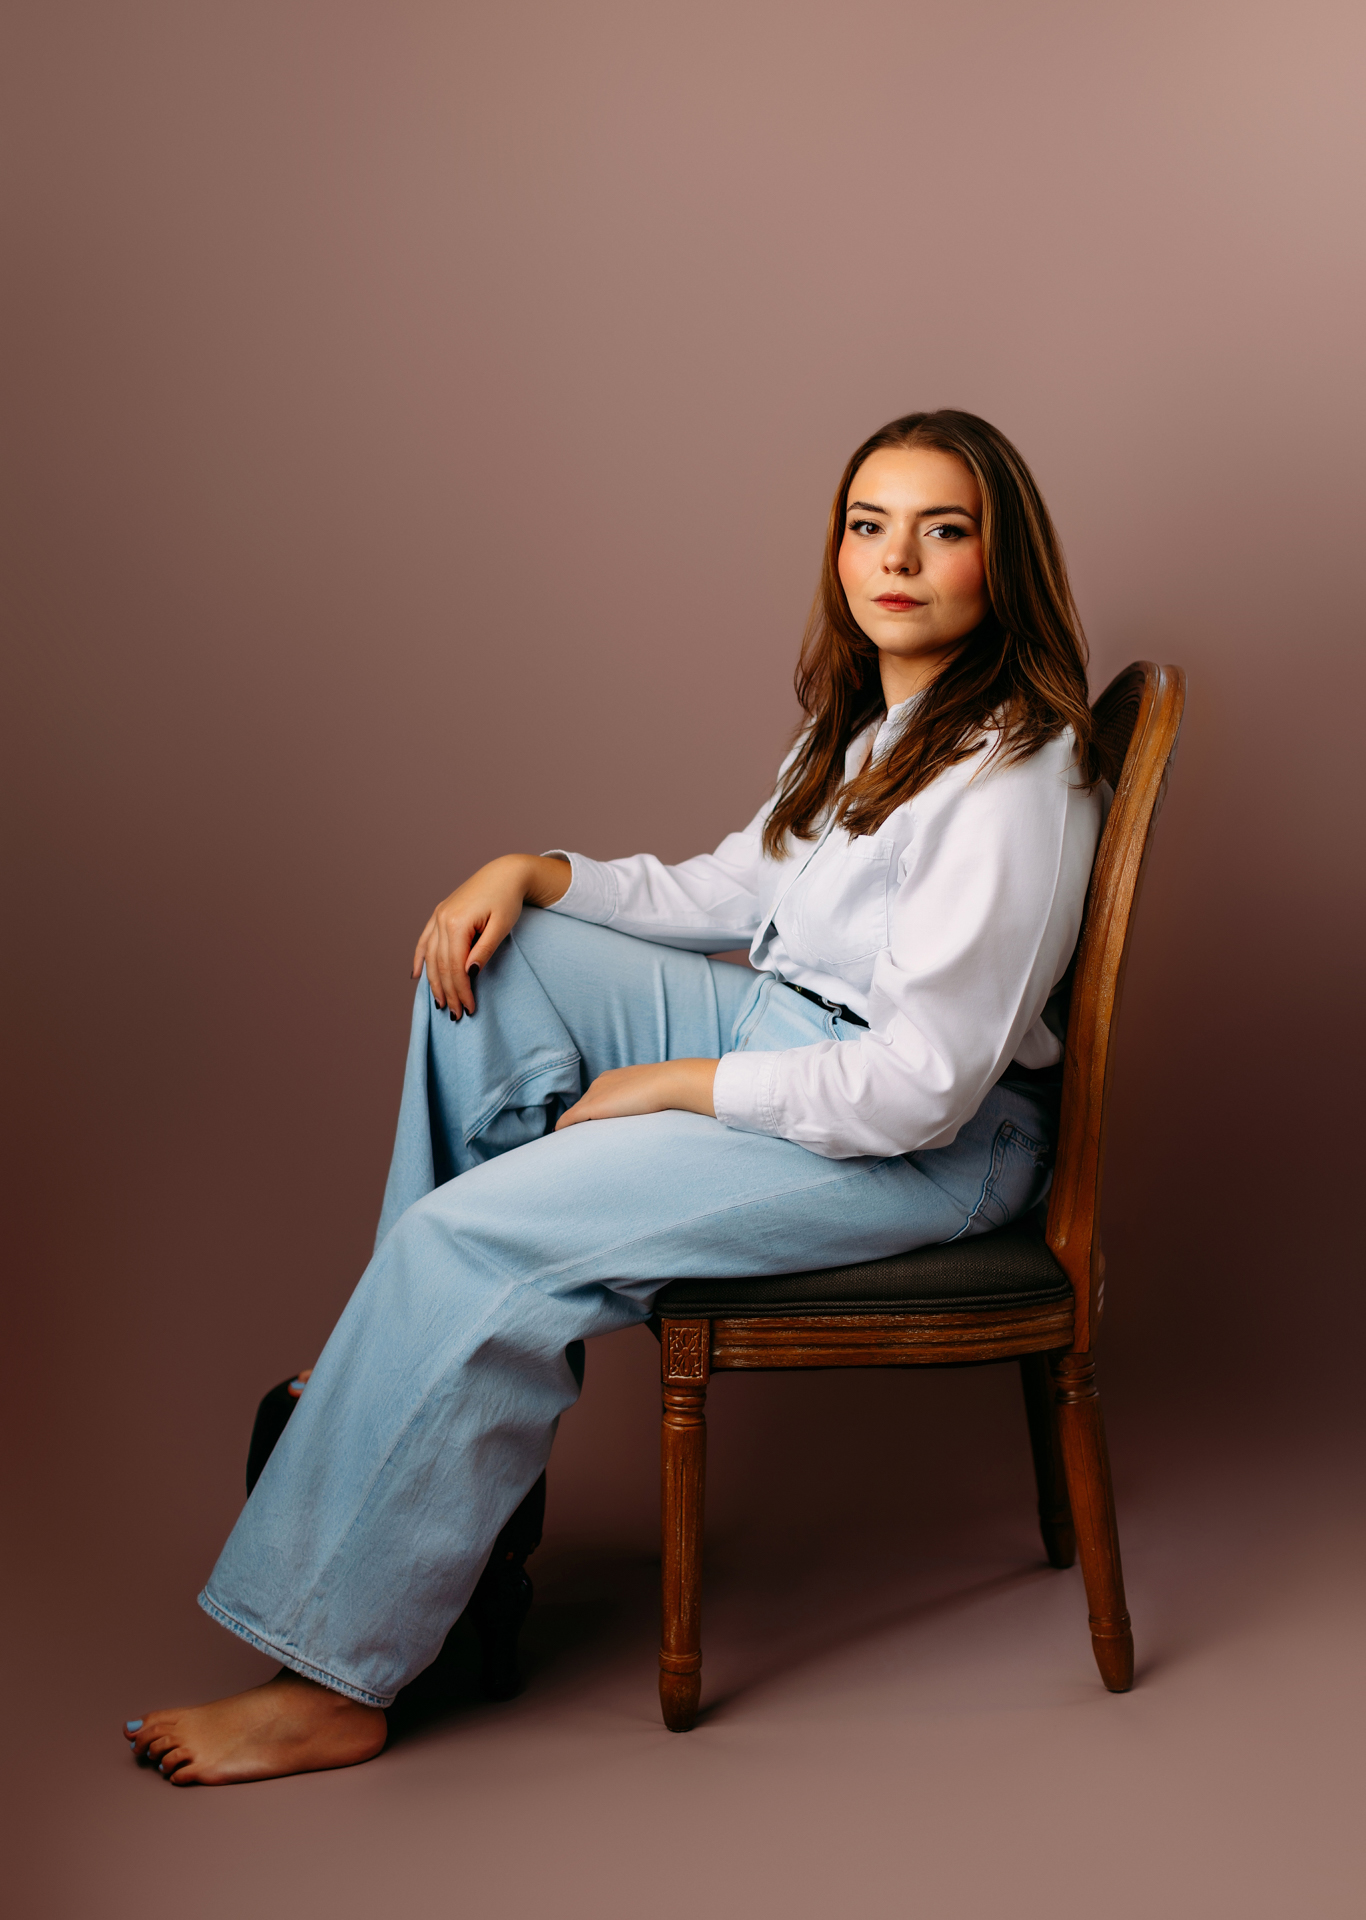 Professional theatre headshot of woman in white pants and light blue jeans sitting profile on wooden chair